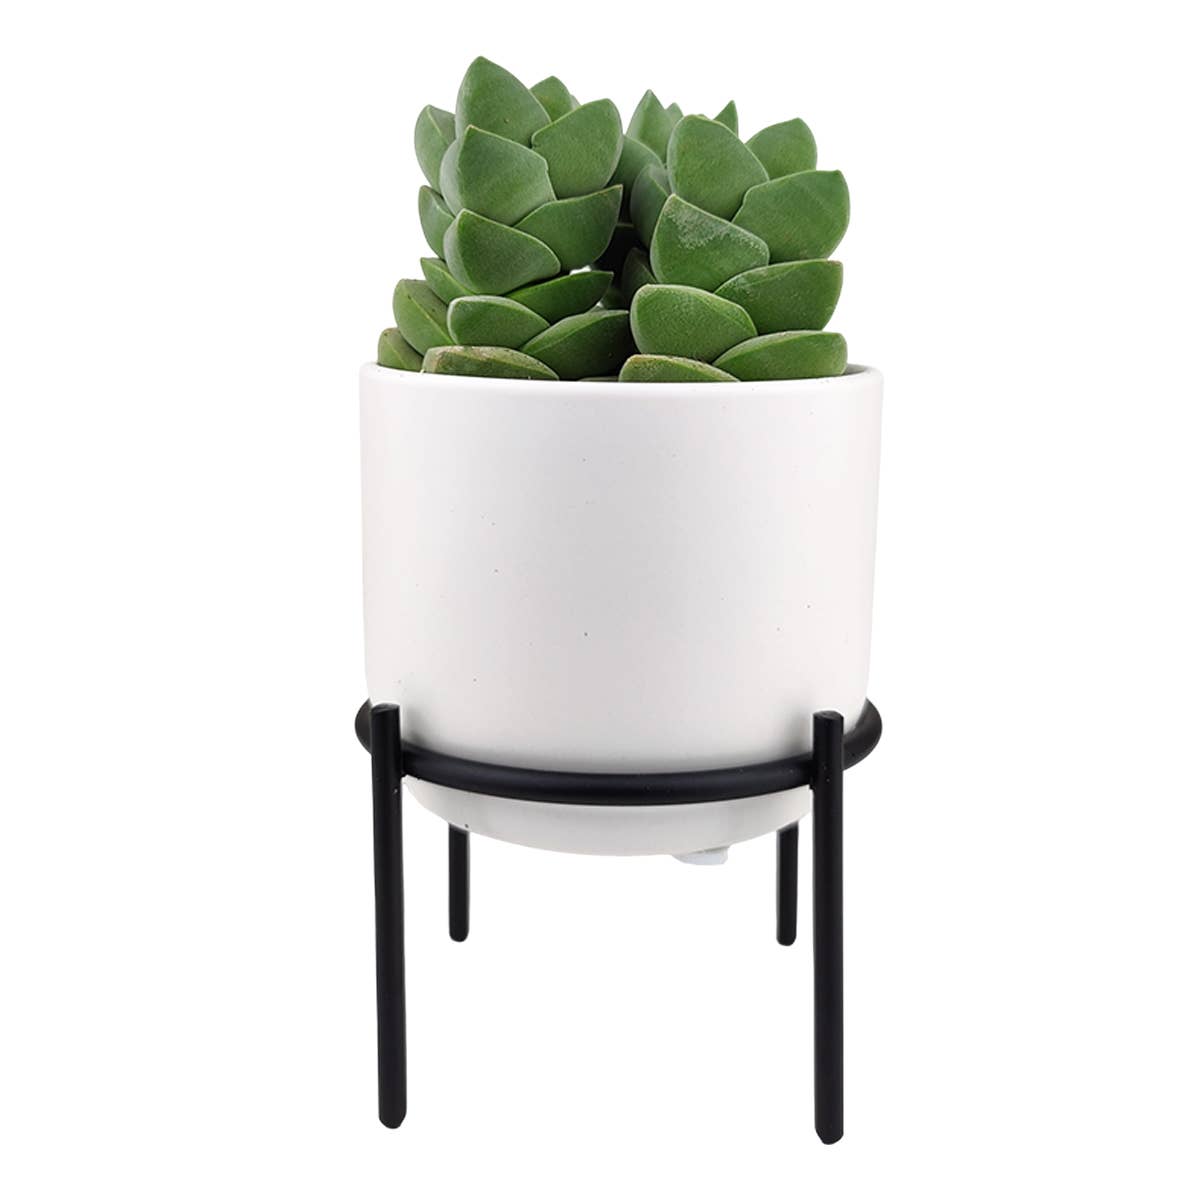 4" Solid White Ceramic Planter with Black Metal Stand